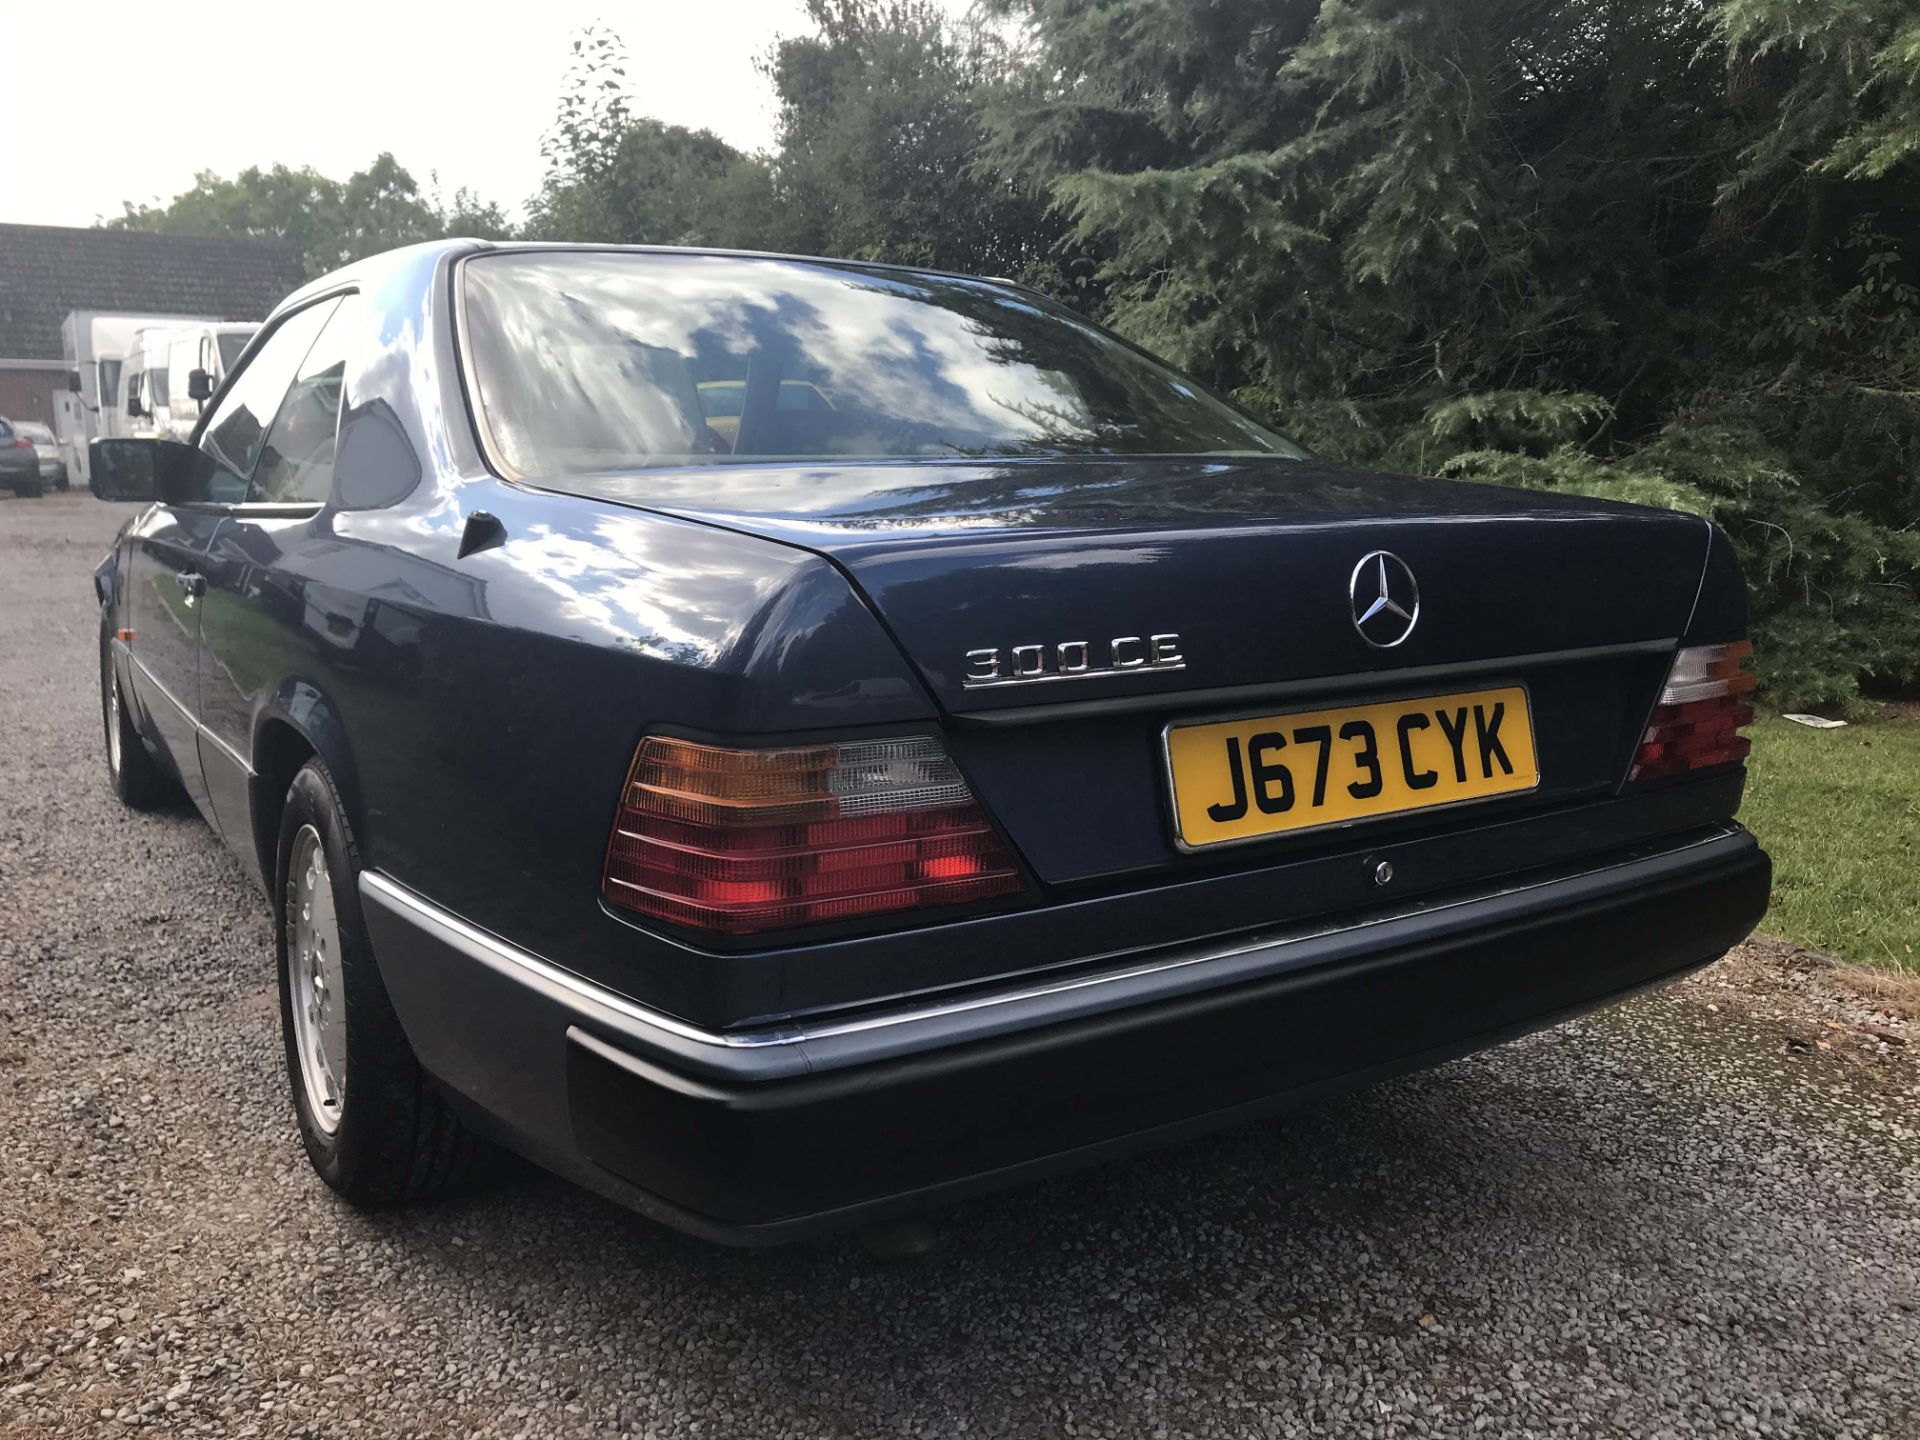 1991 Mercedes 300CE Coupe - Image 3 of 6